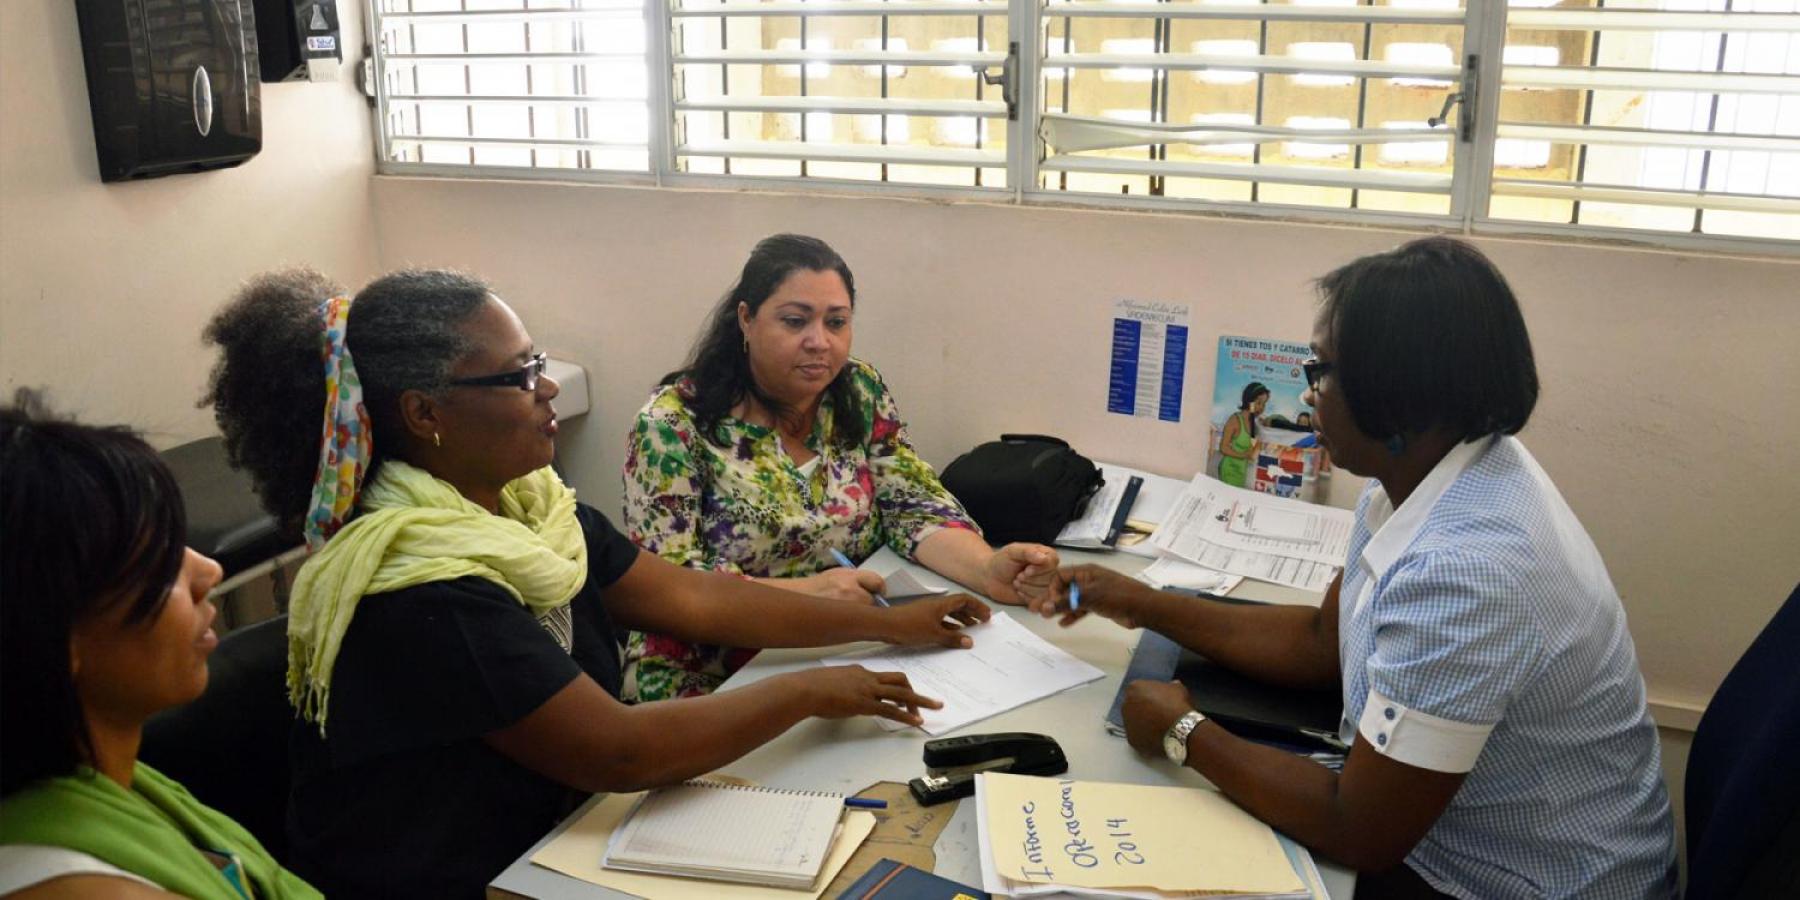 Patients speak with a health professional at an integrated care clinic in the Dominican Republic.